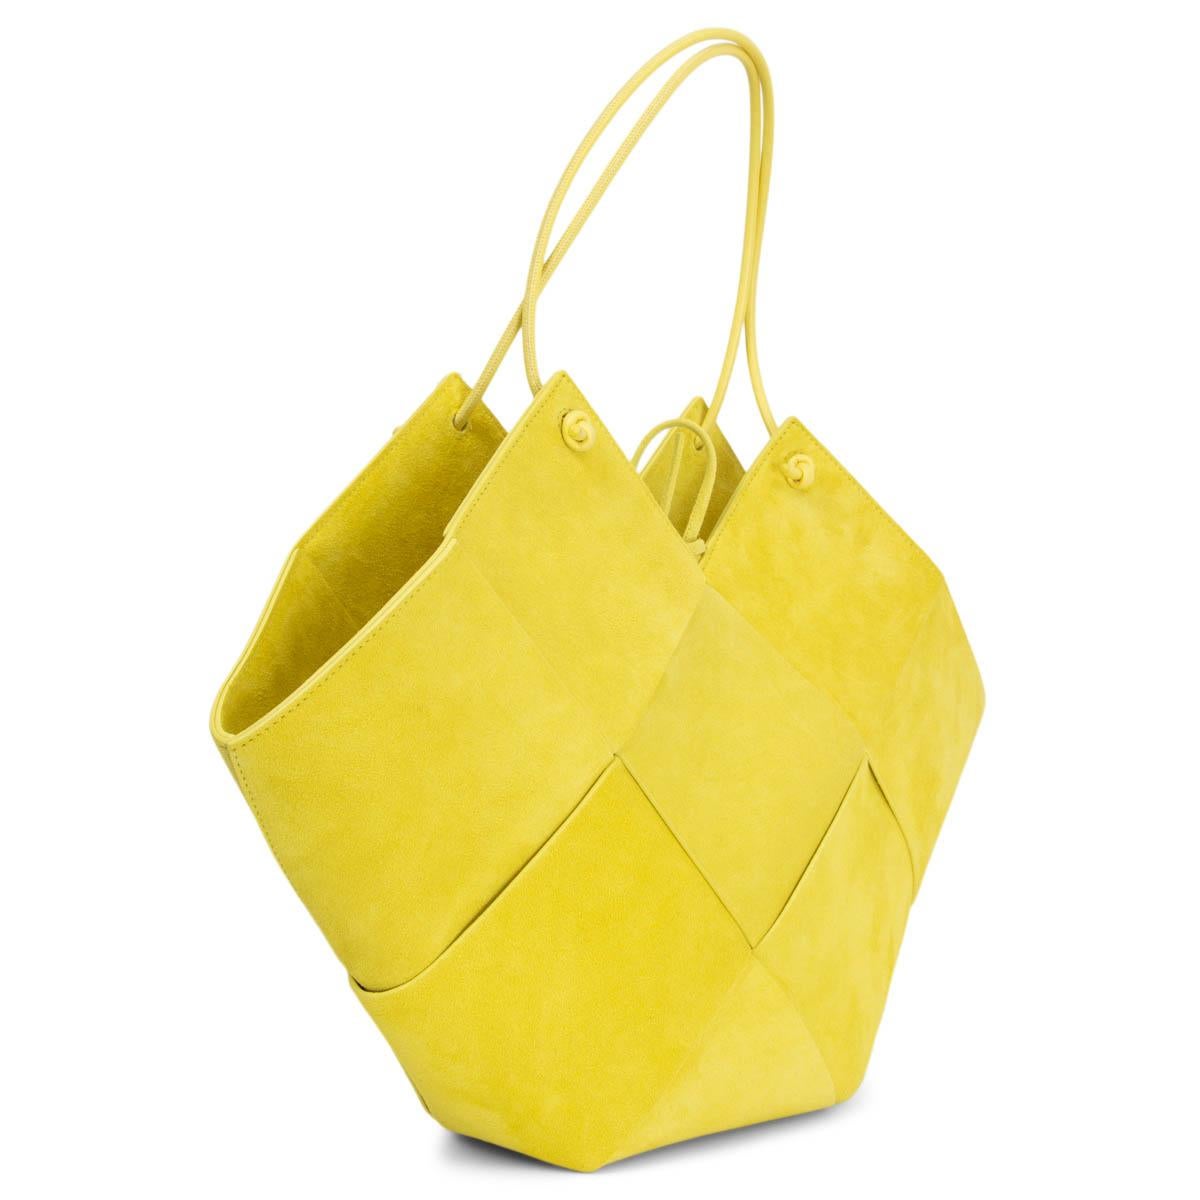 100% authentic Bottega Veneta Flower Basket Small tote bag in Sherbet-Silver (neon yellow) intrecciato suede. It has slender leather top handles that can also be slung over the shoulder. Unlined. The internal zipped pouch is ideal for storing your